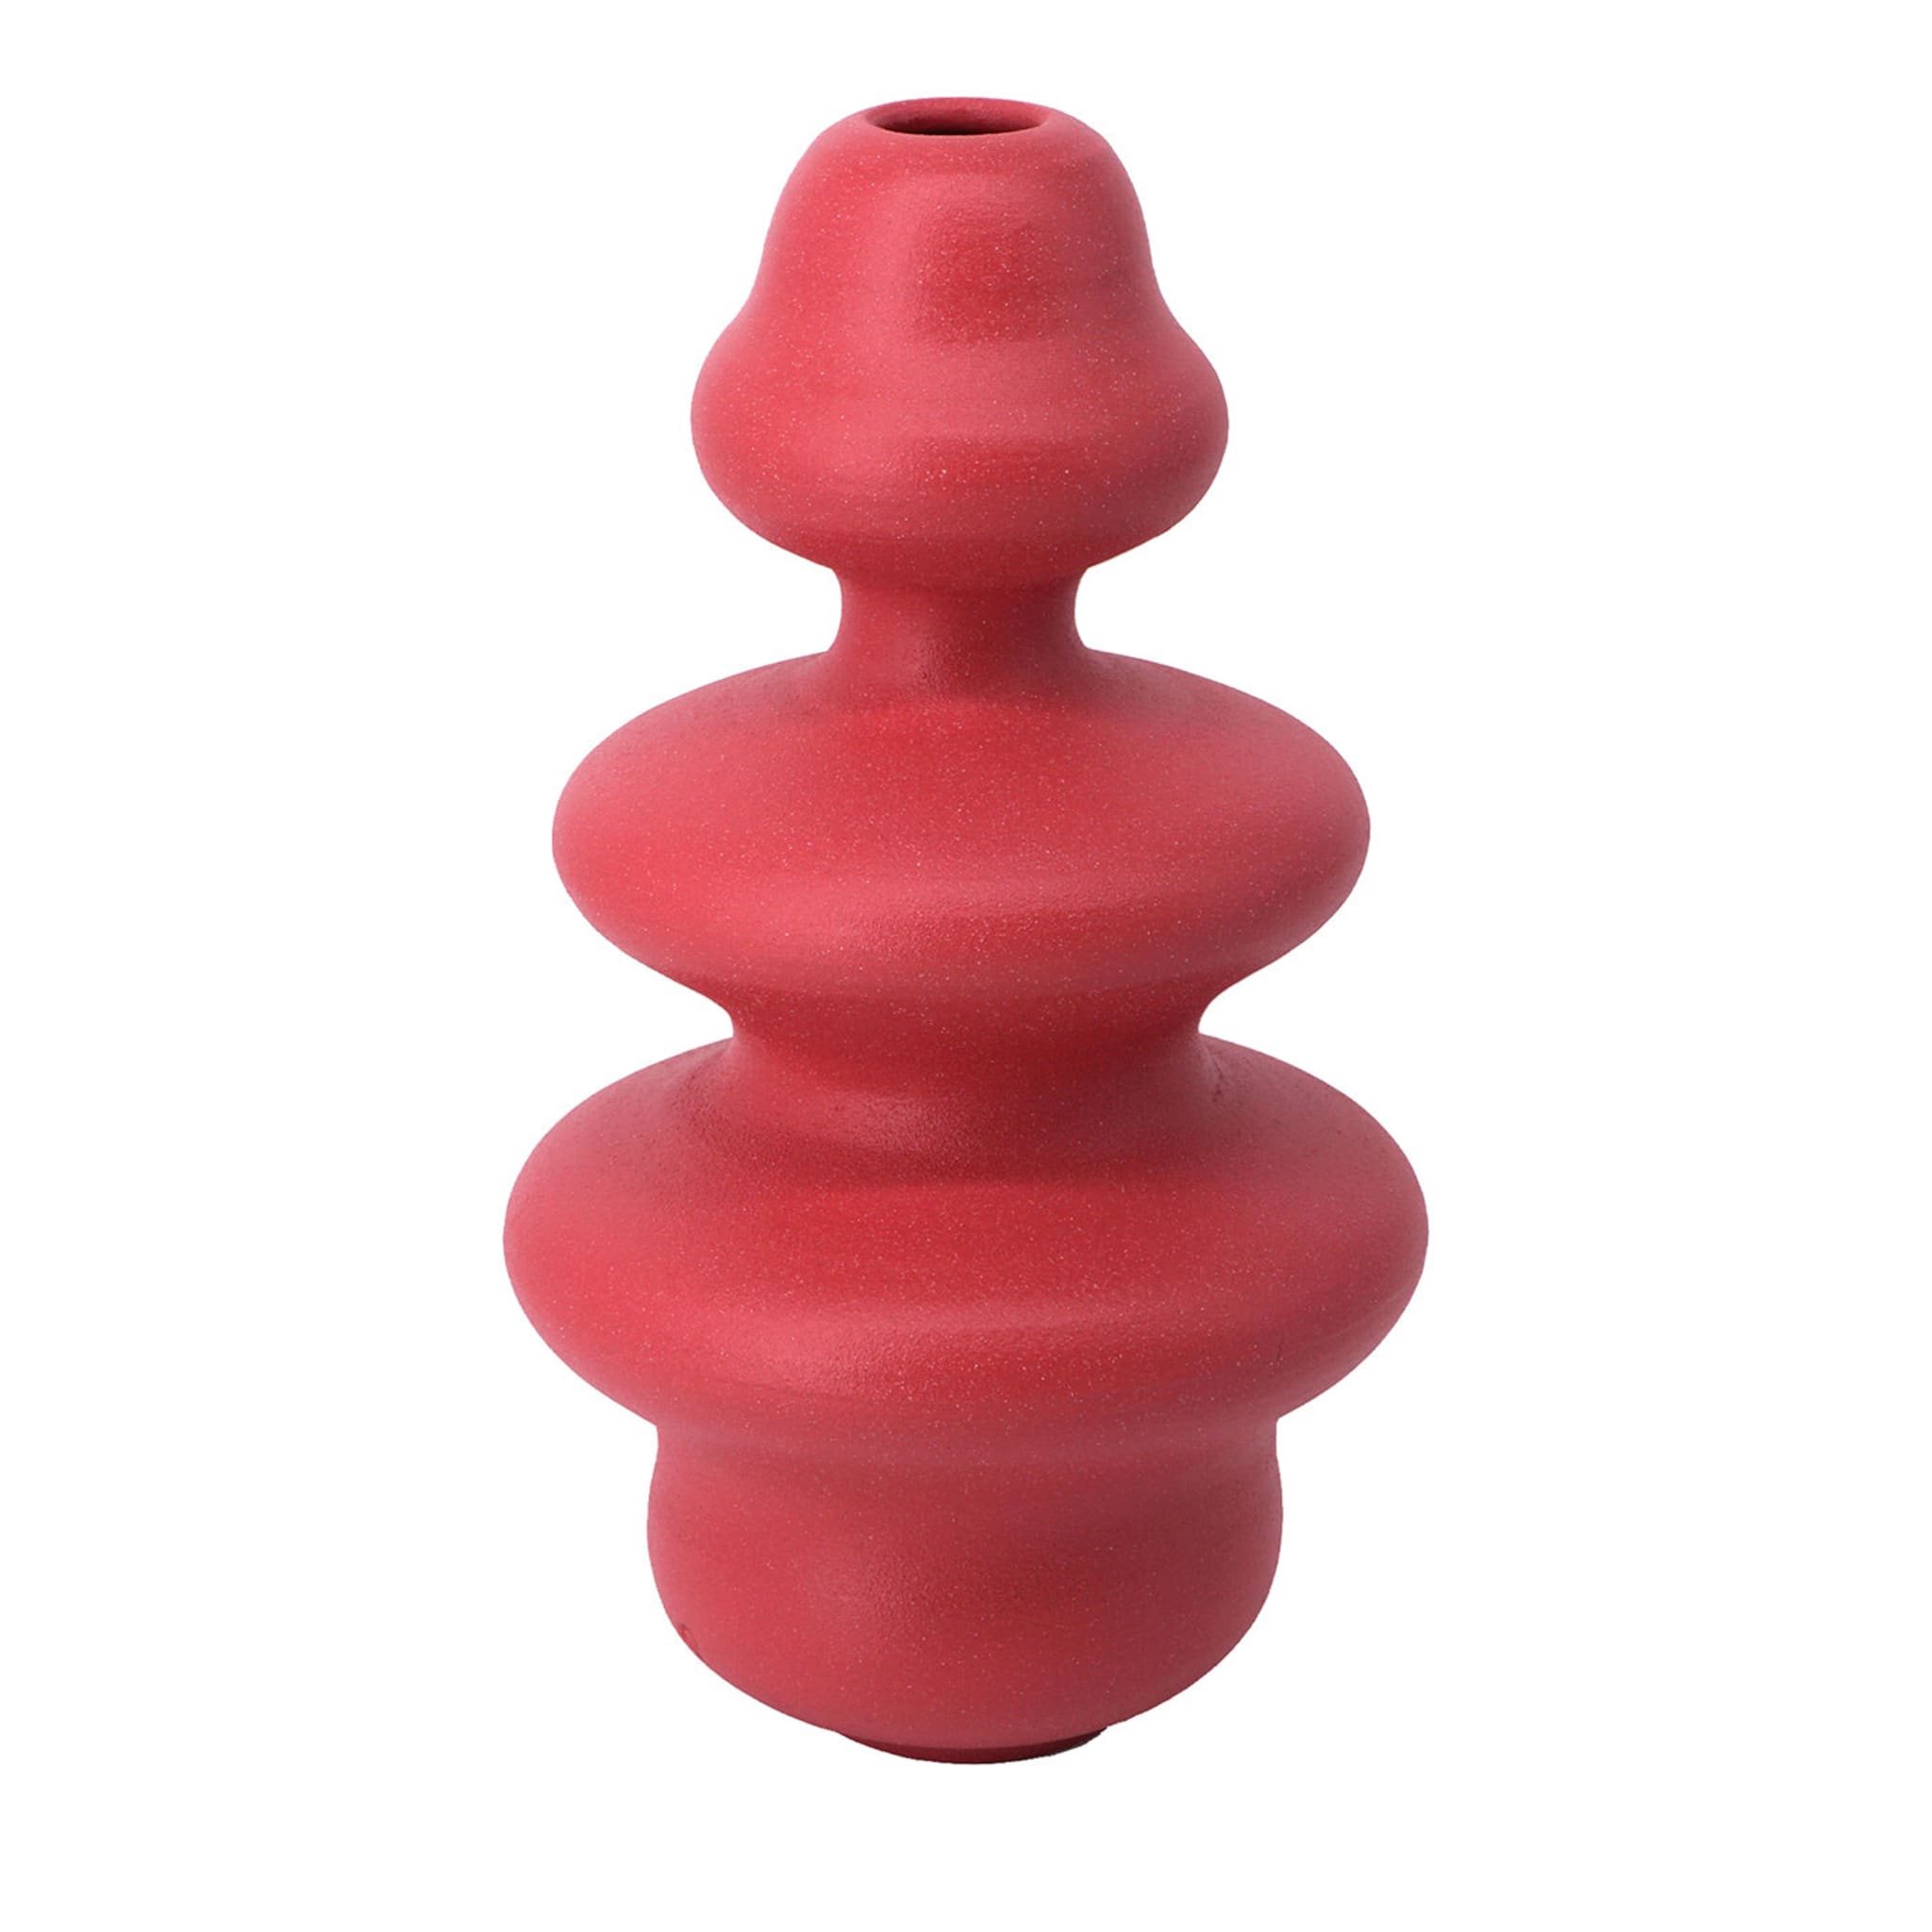 Crisalide Red Vase #1 - Main view